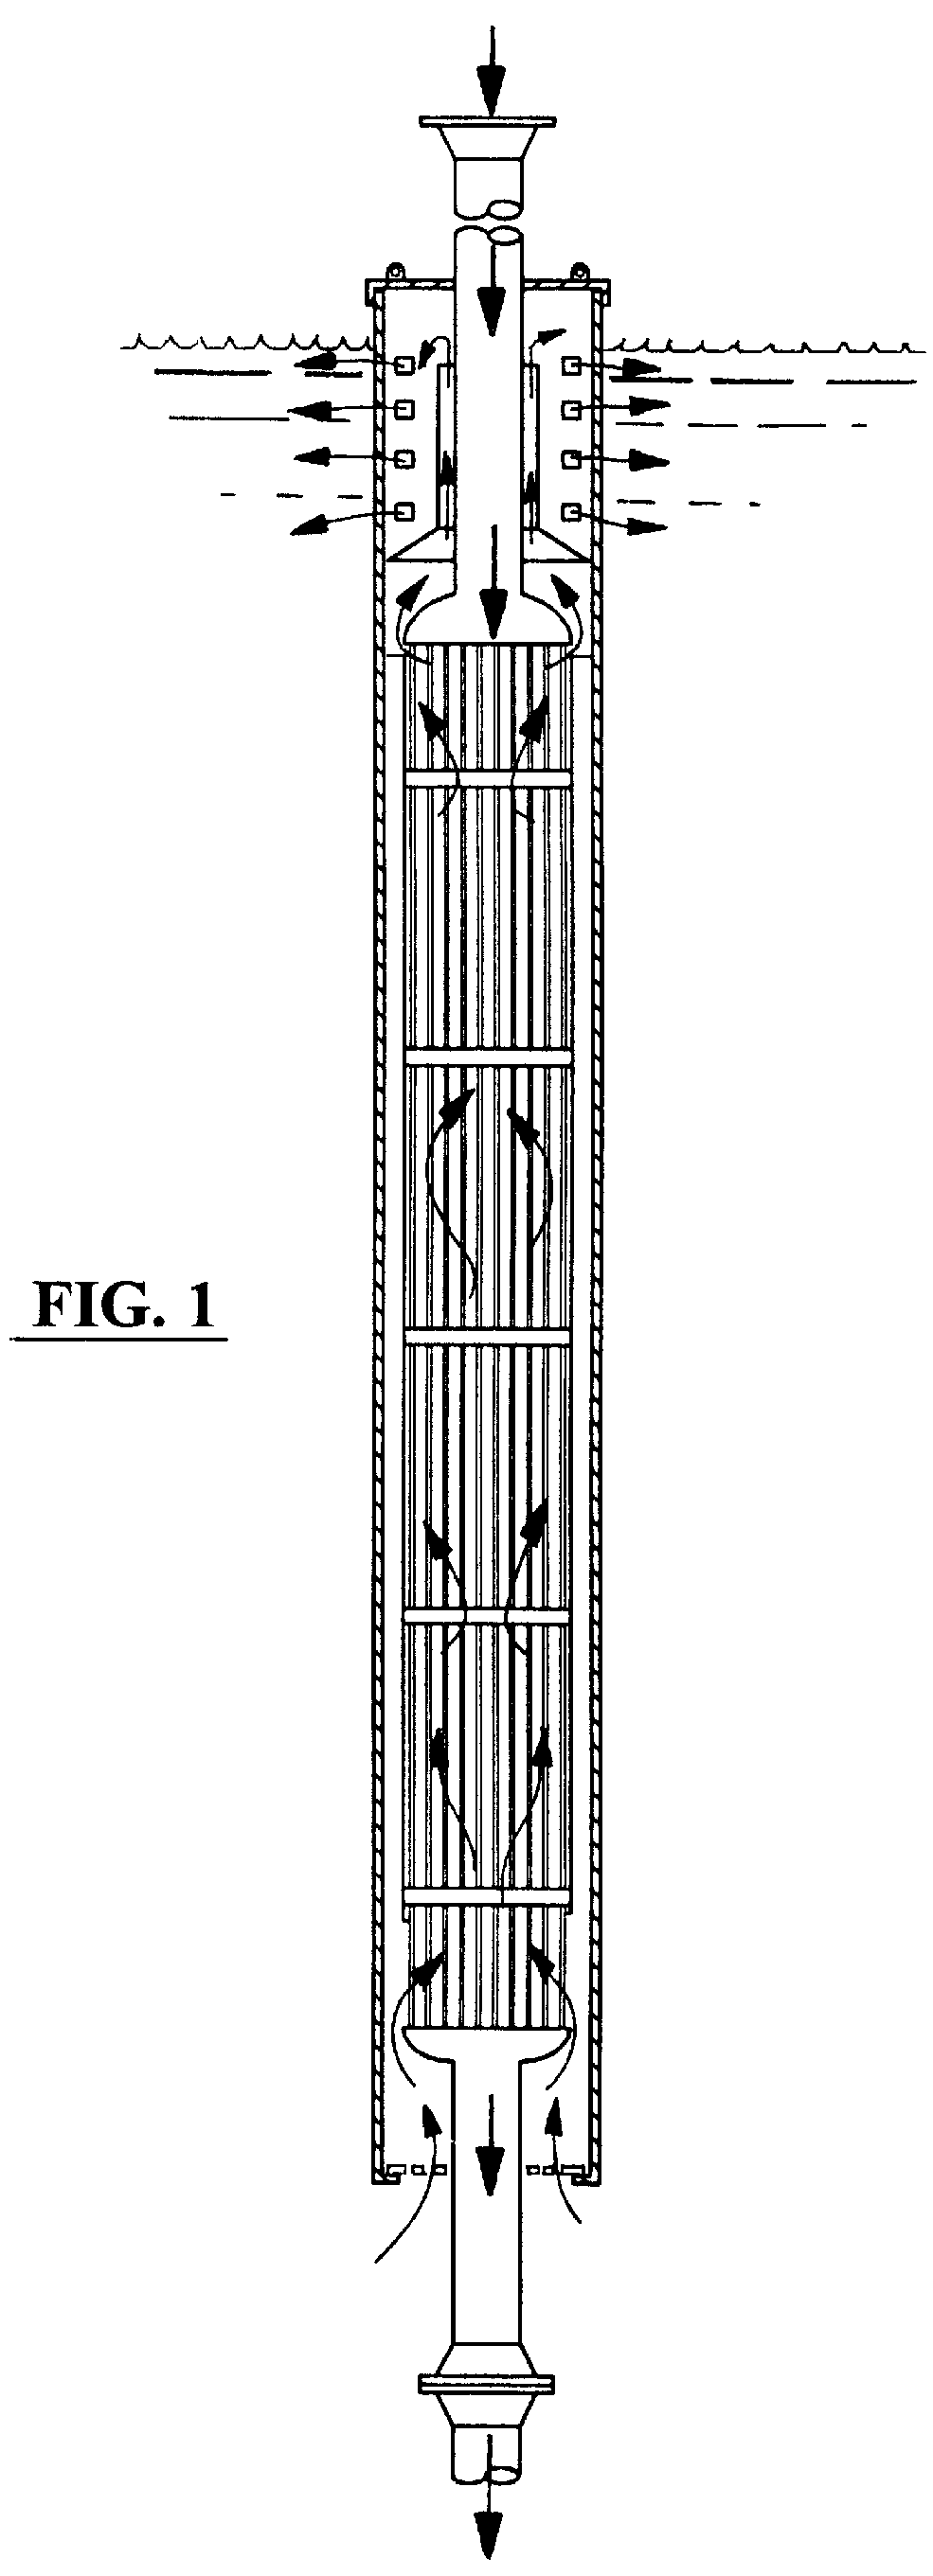 Passive, thermocycling column heat-exchanger system